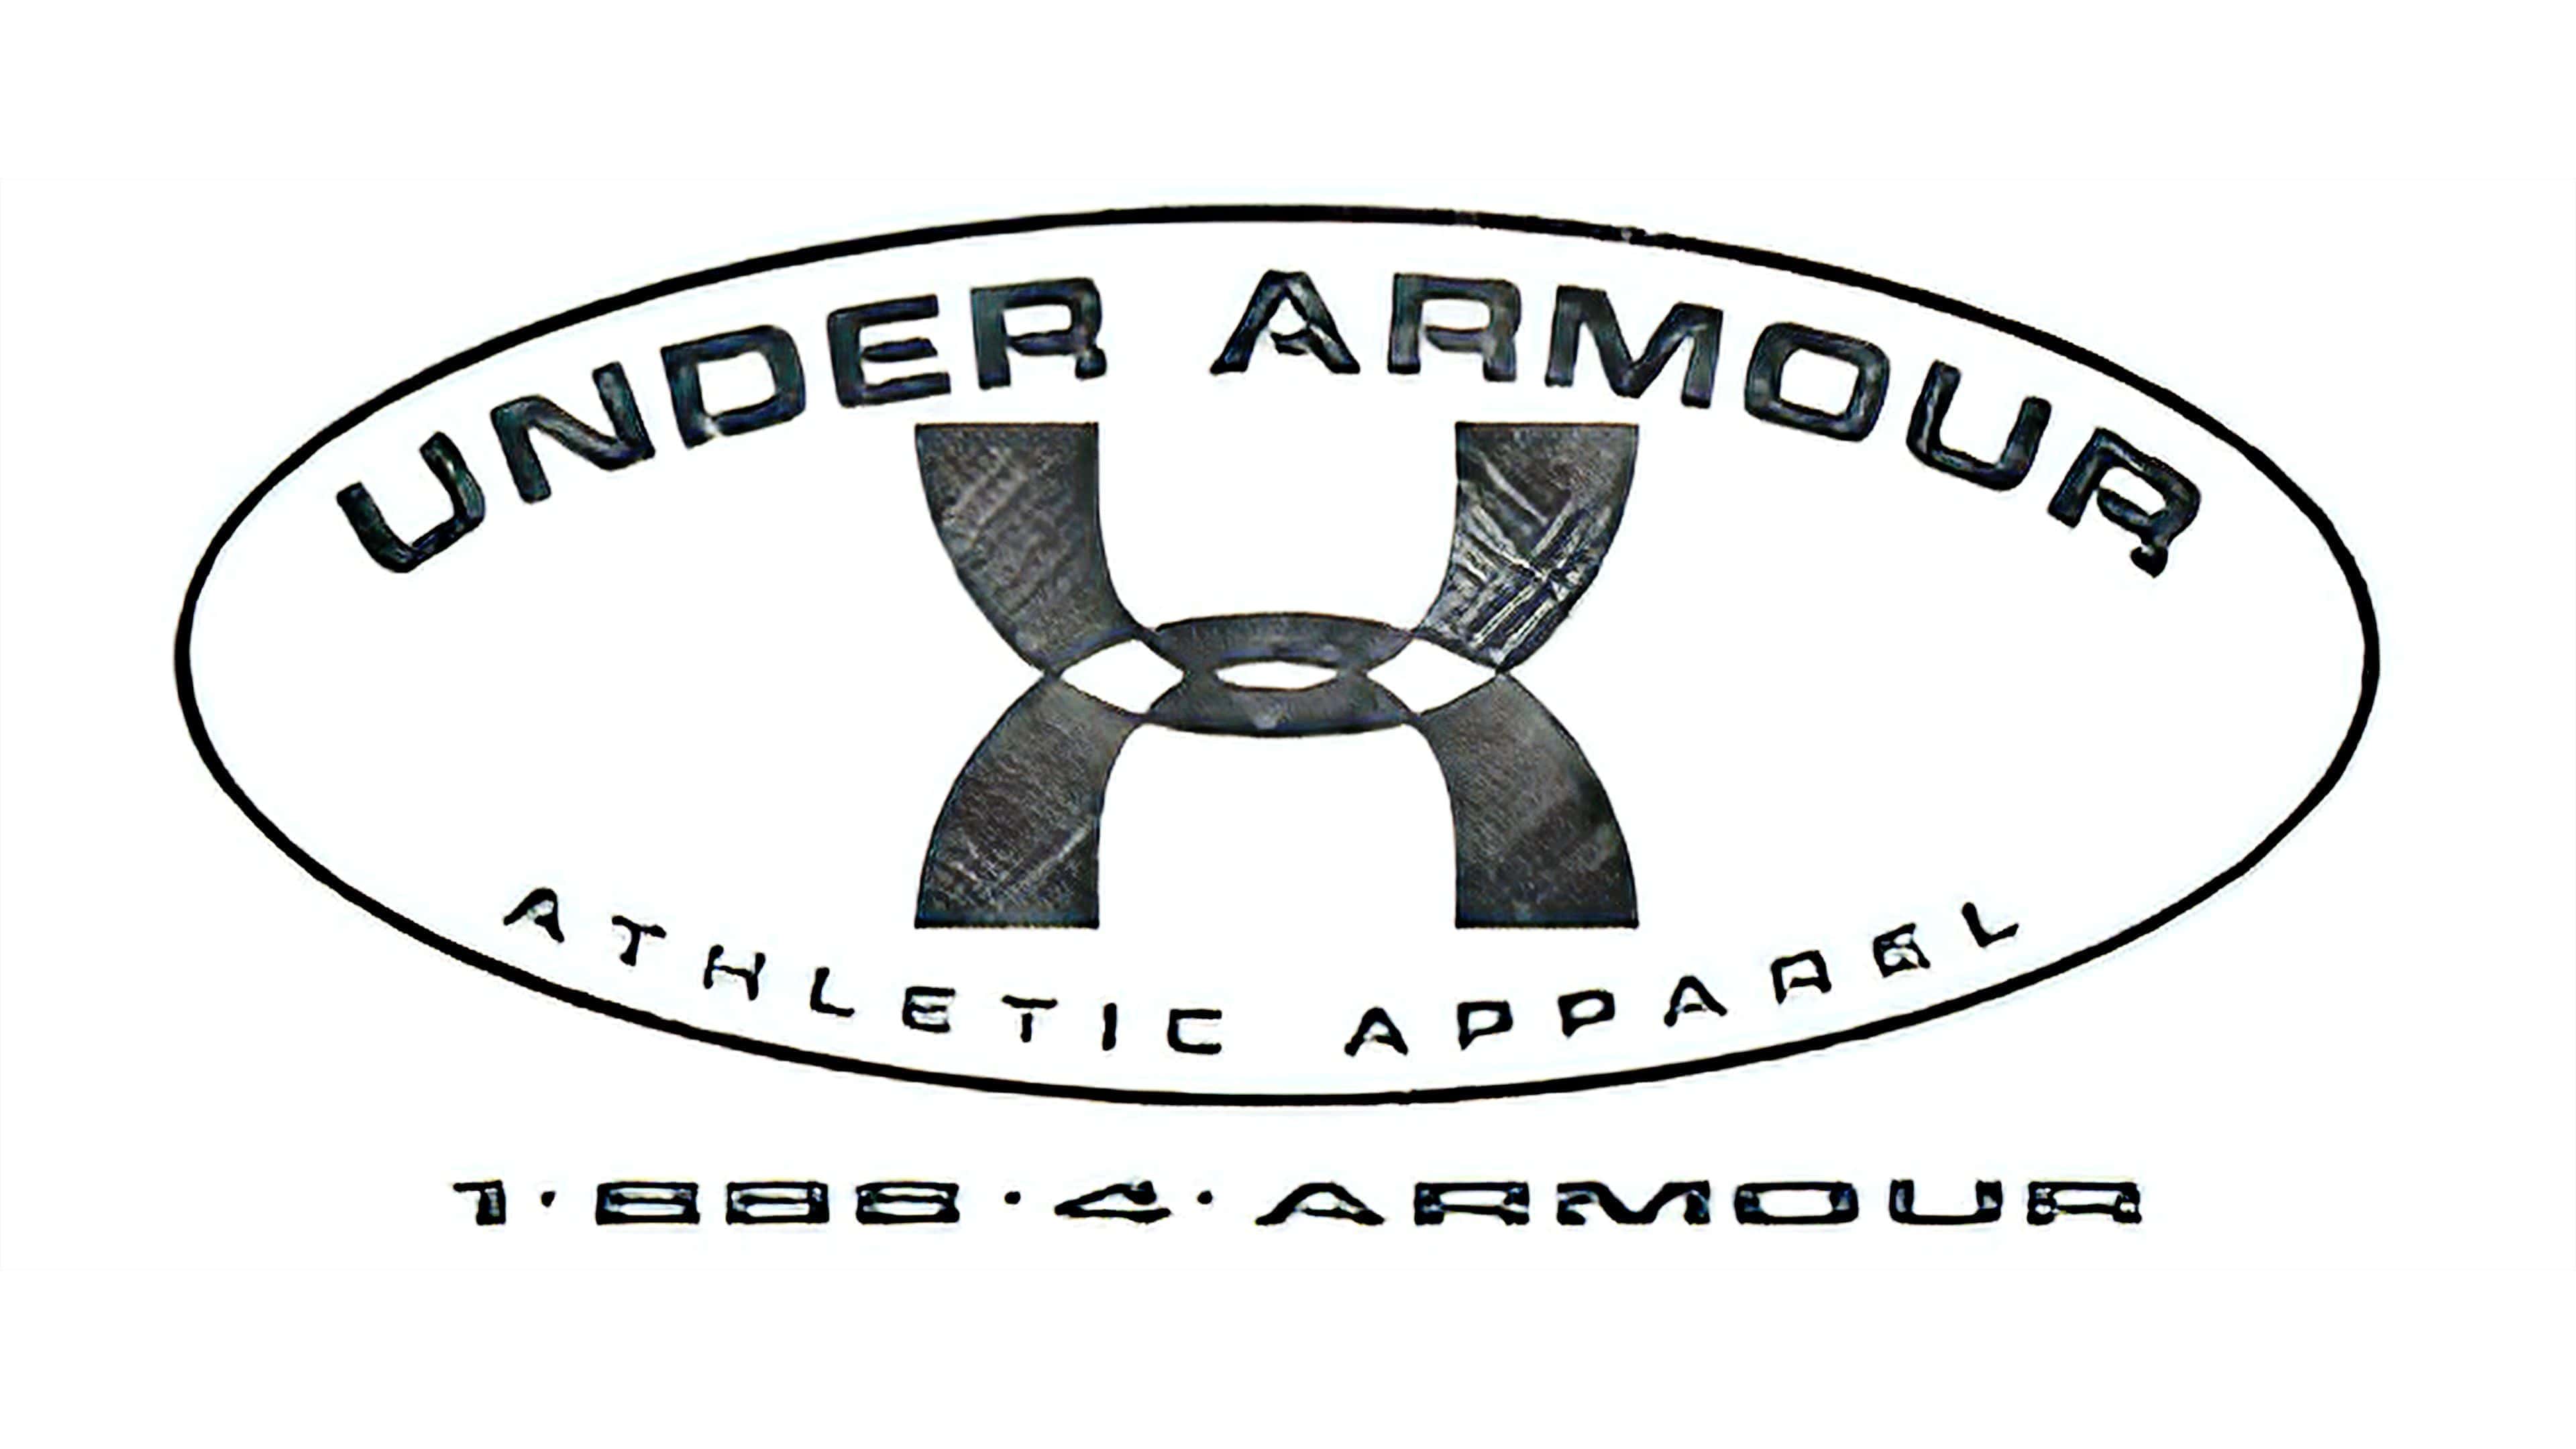 Galaxia Previamente flexible Under Armour Logo, symbol, meaning, history, PNG, brand